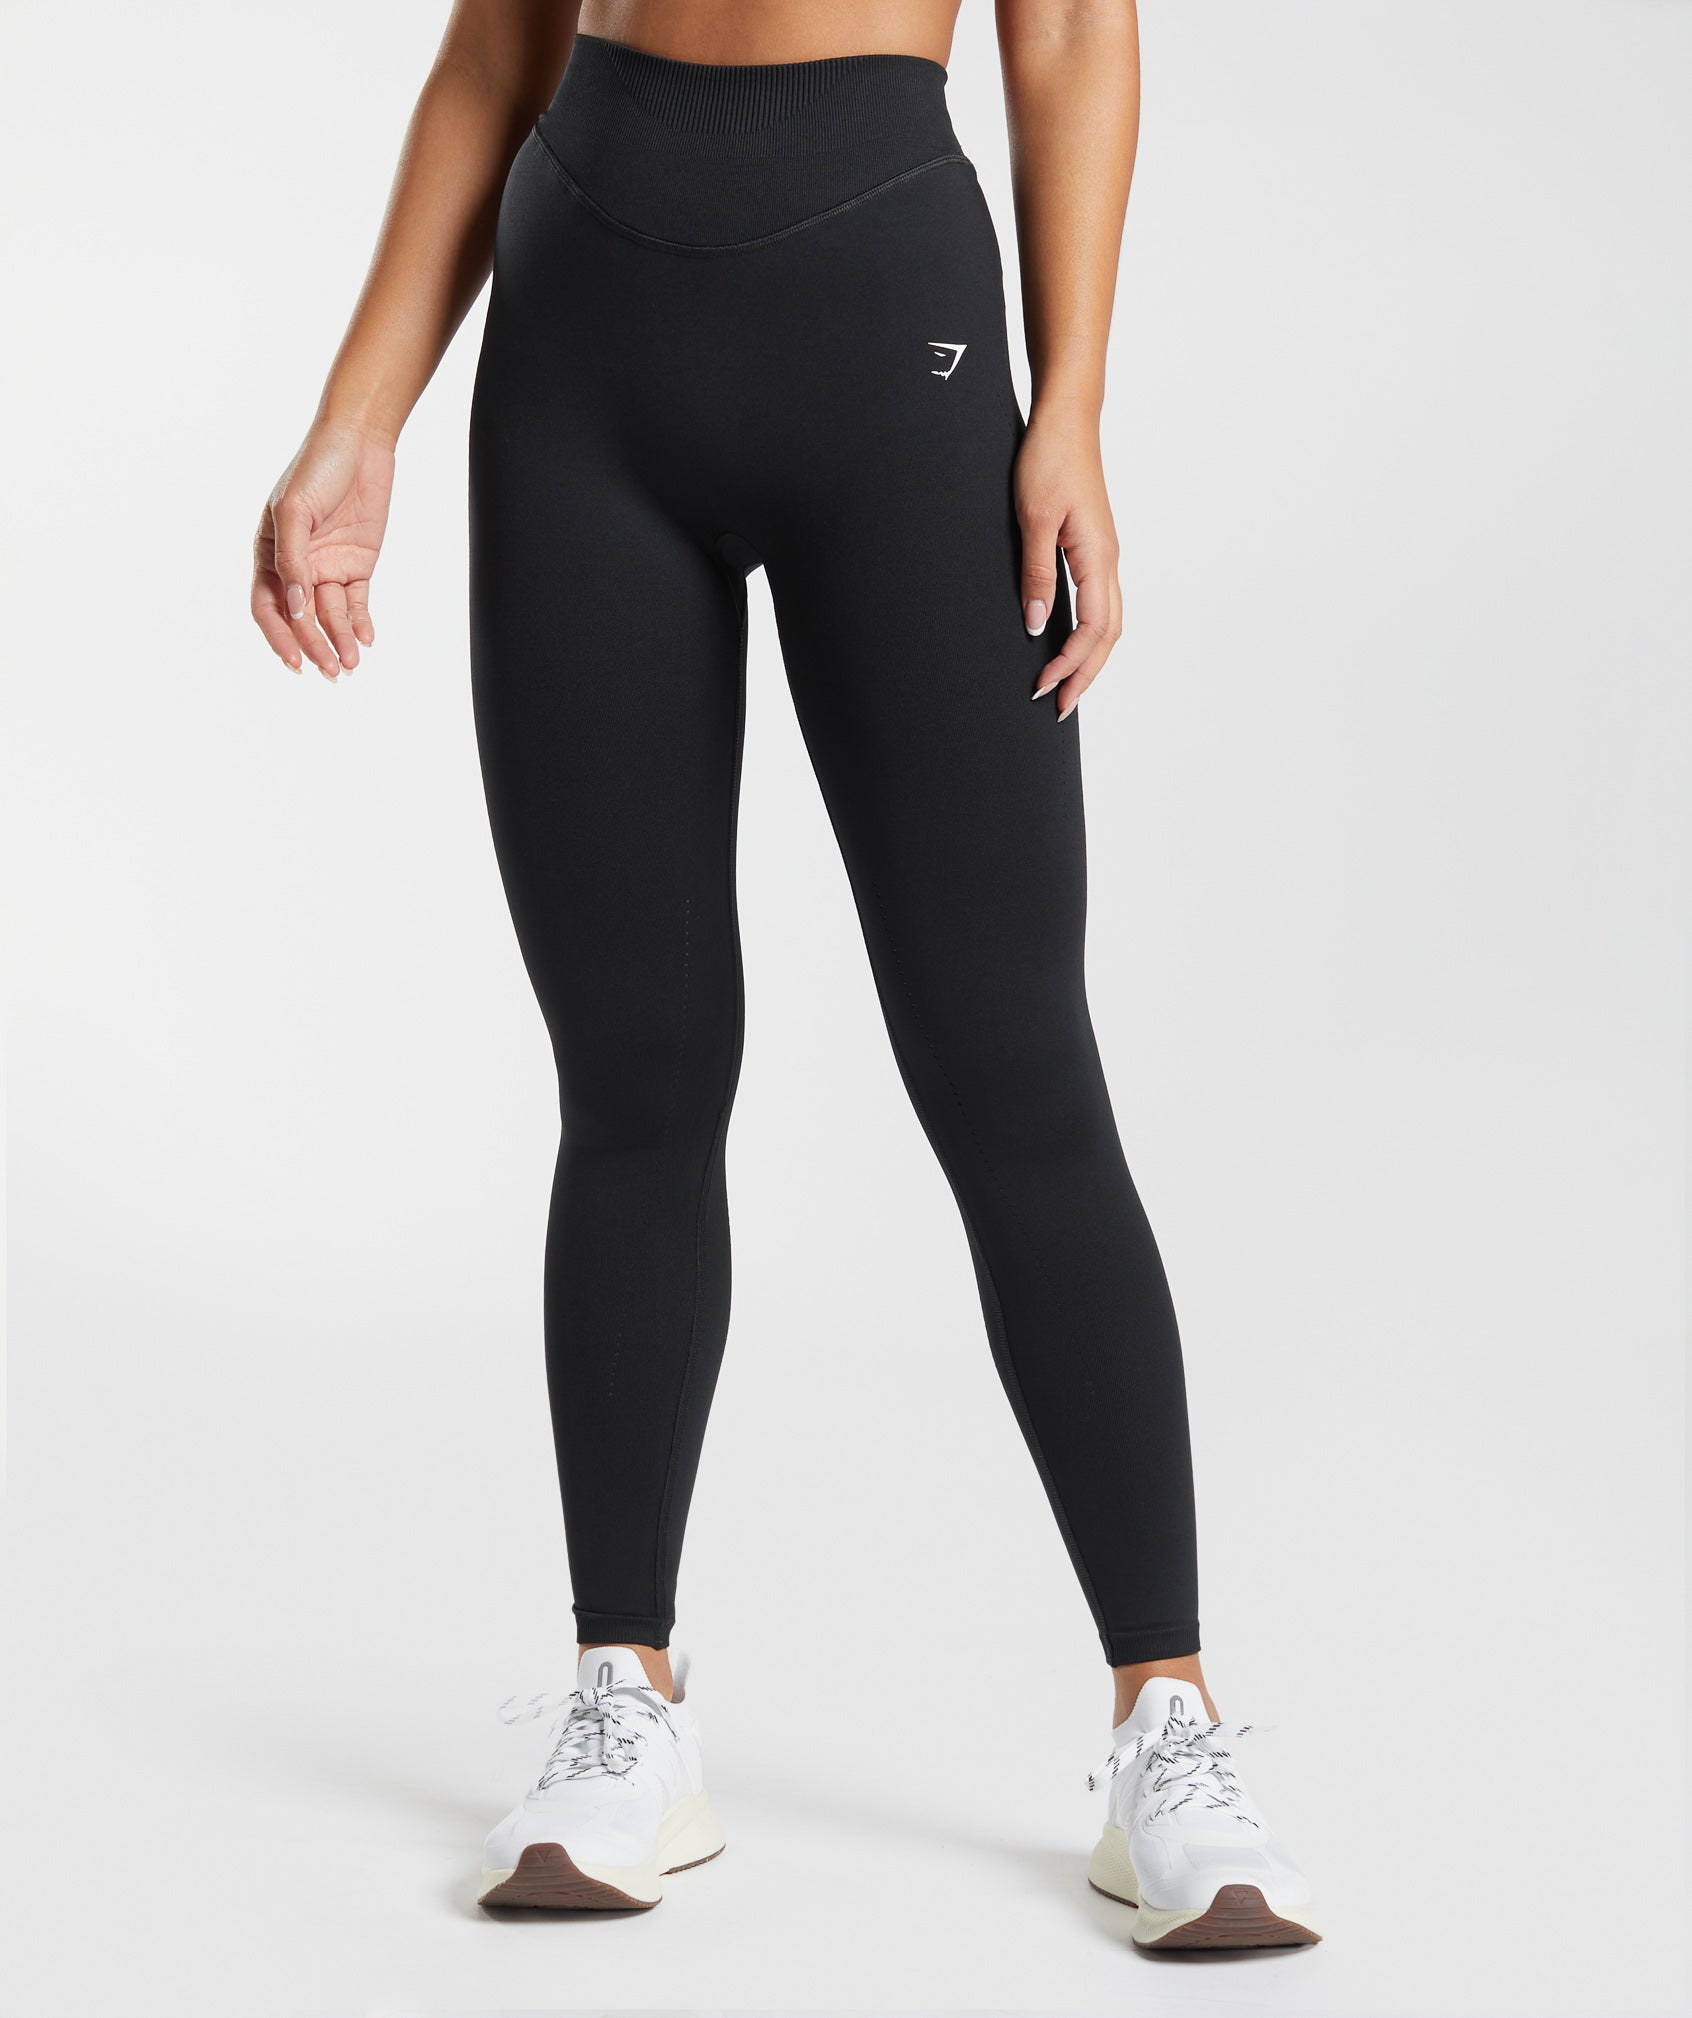  Leggings with Holes for Women Sweat Proof Tummy